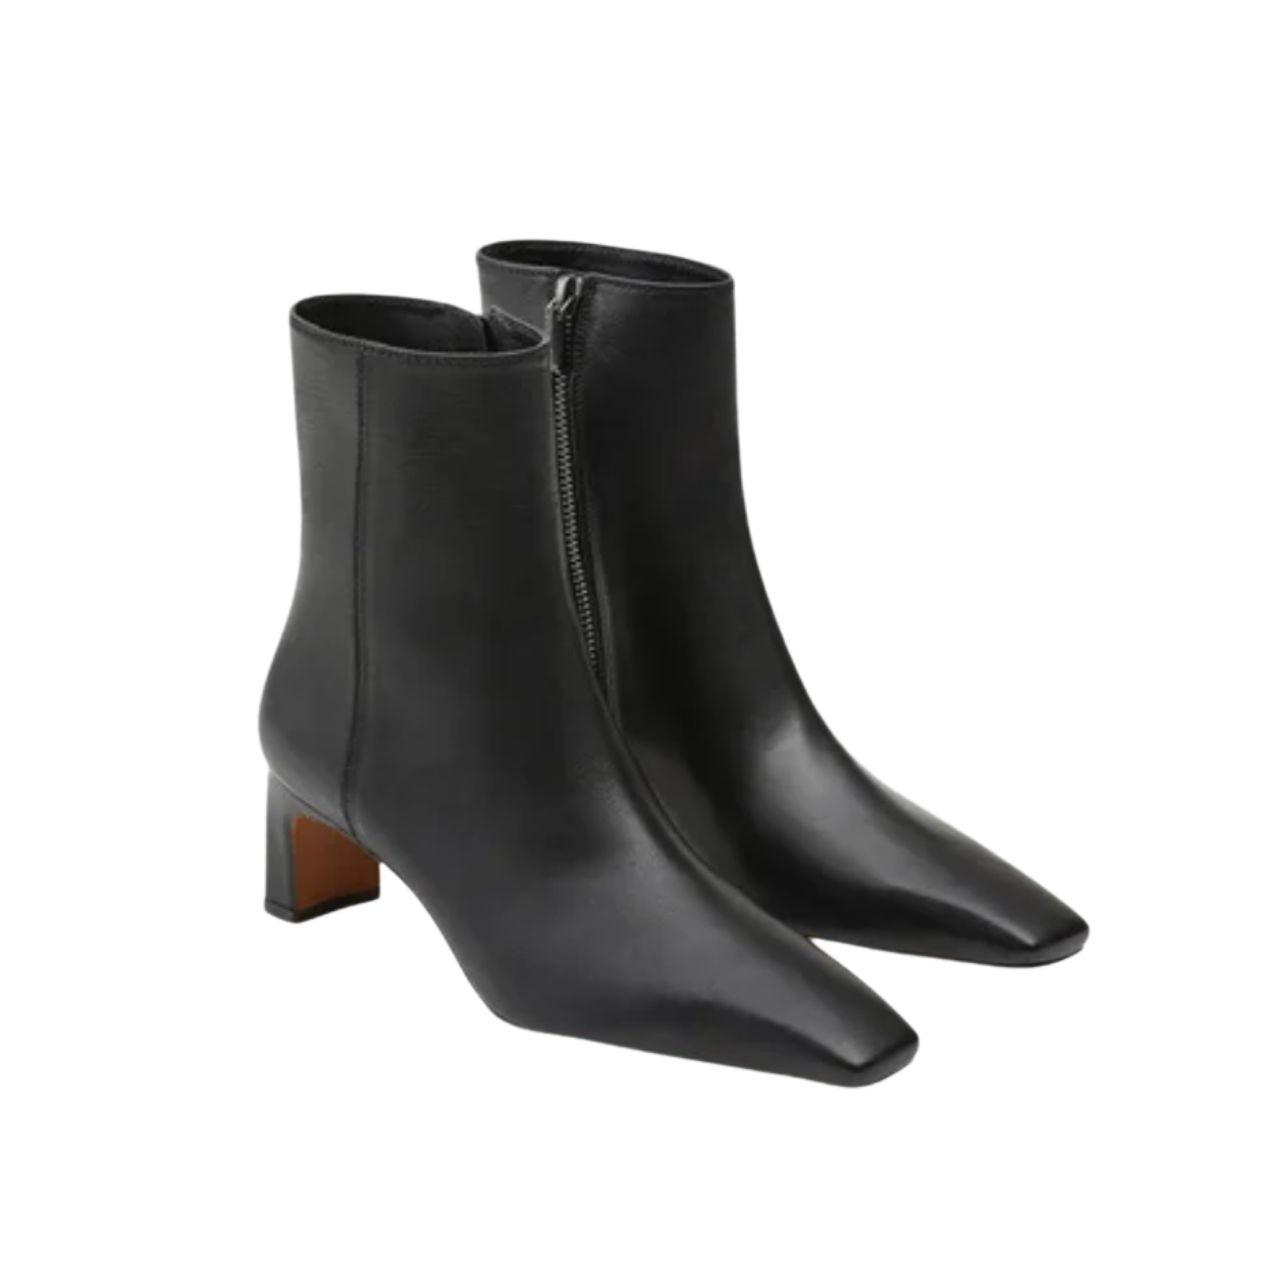 Lafayette 148 New York black ankle boots